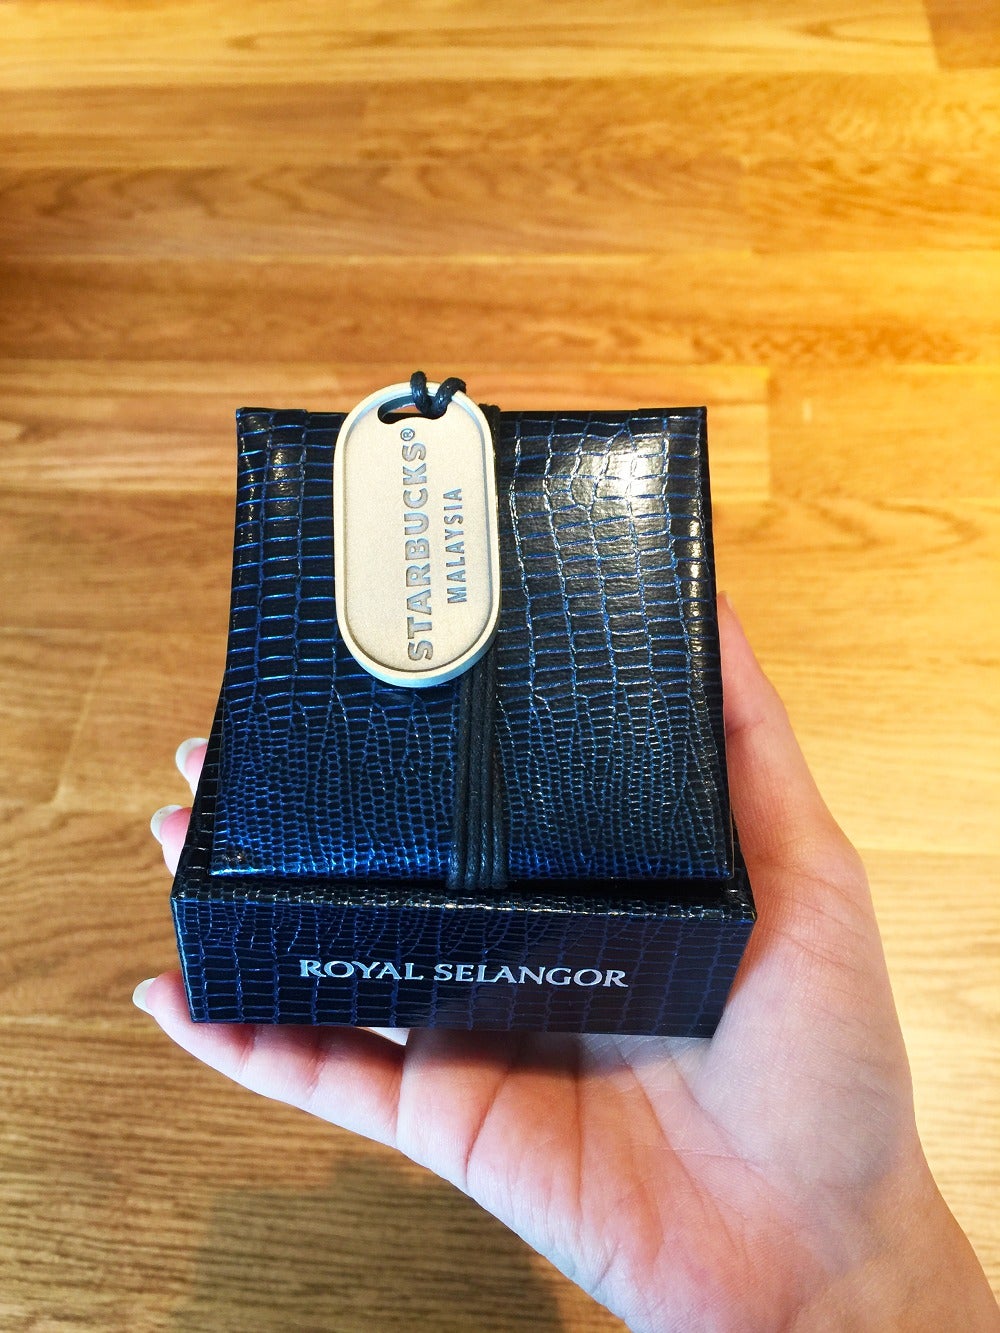 Starbucks X Royal Selangor Collection Is Launching On Dec 21 &Amp; Looks Super Exquisite! - World Of Buzz 4